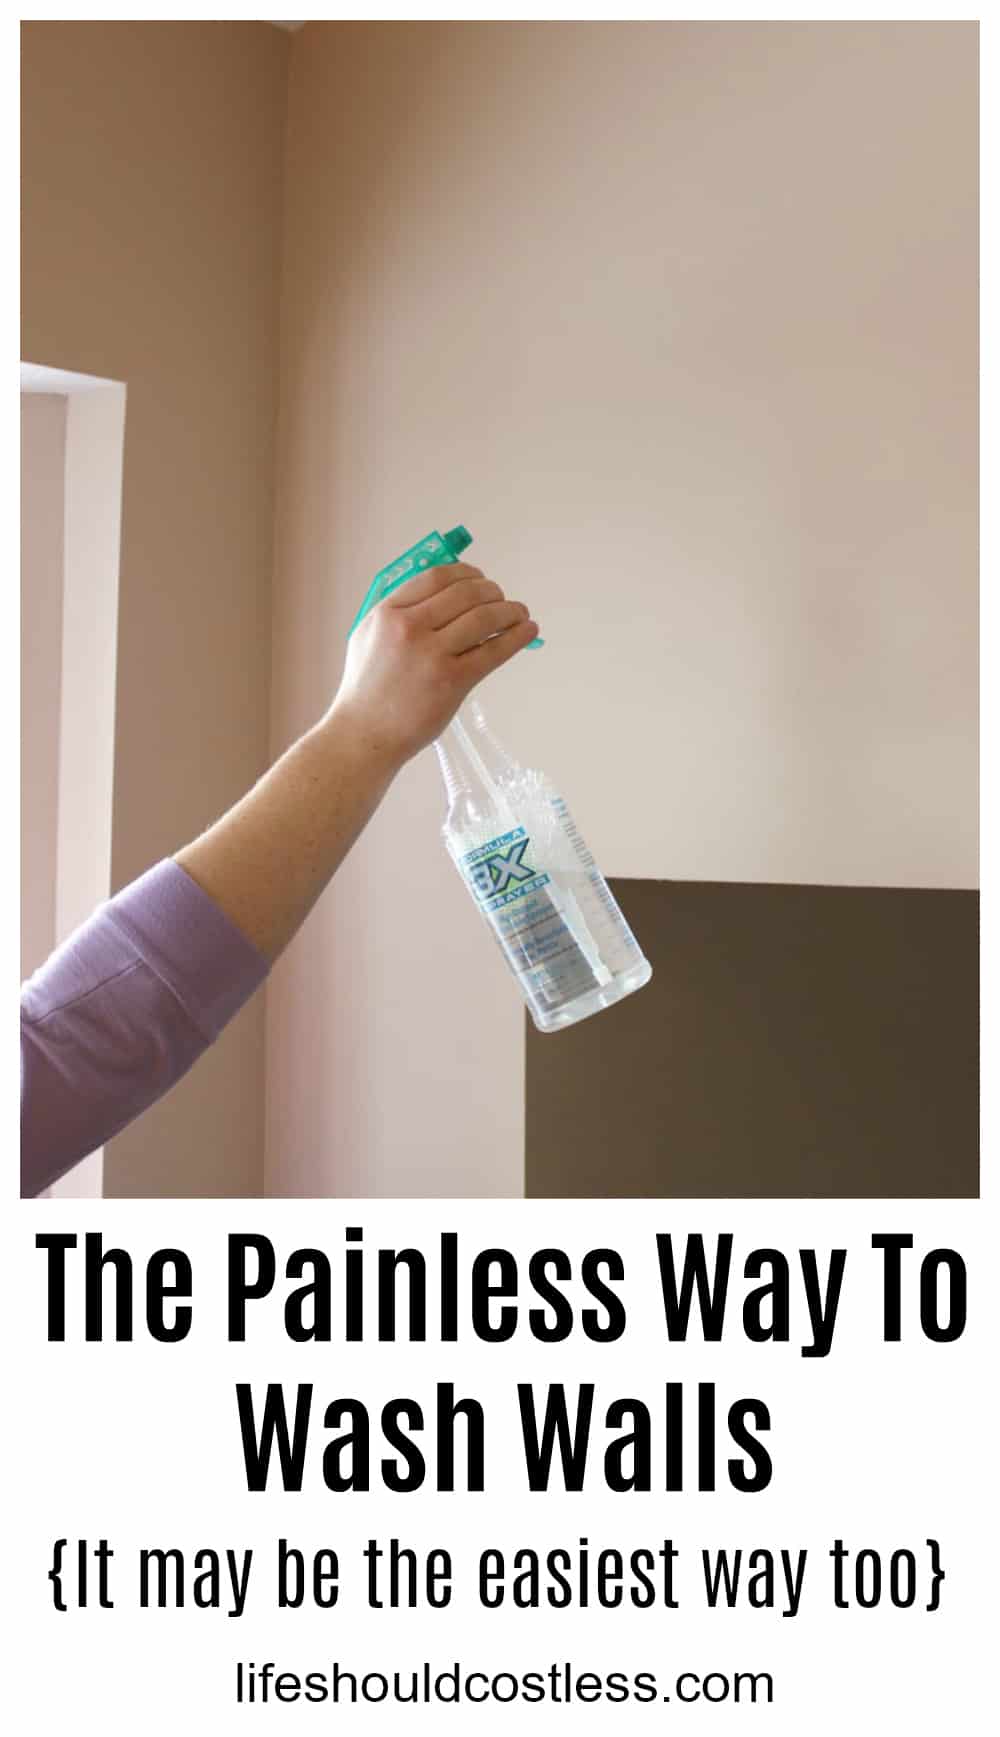 The Painless Way To Wash Walls